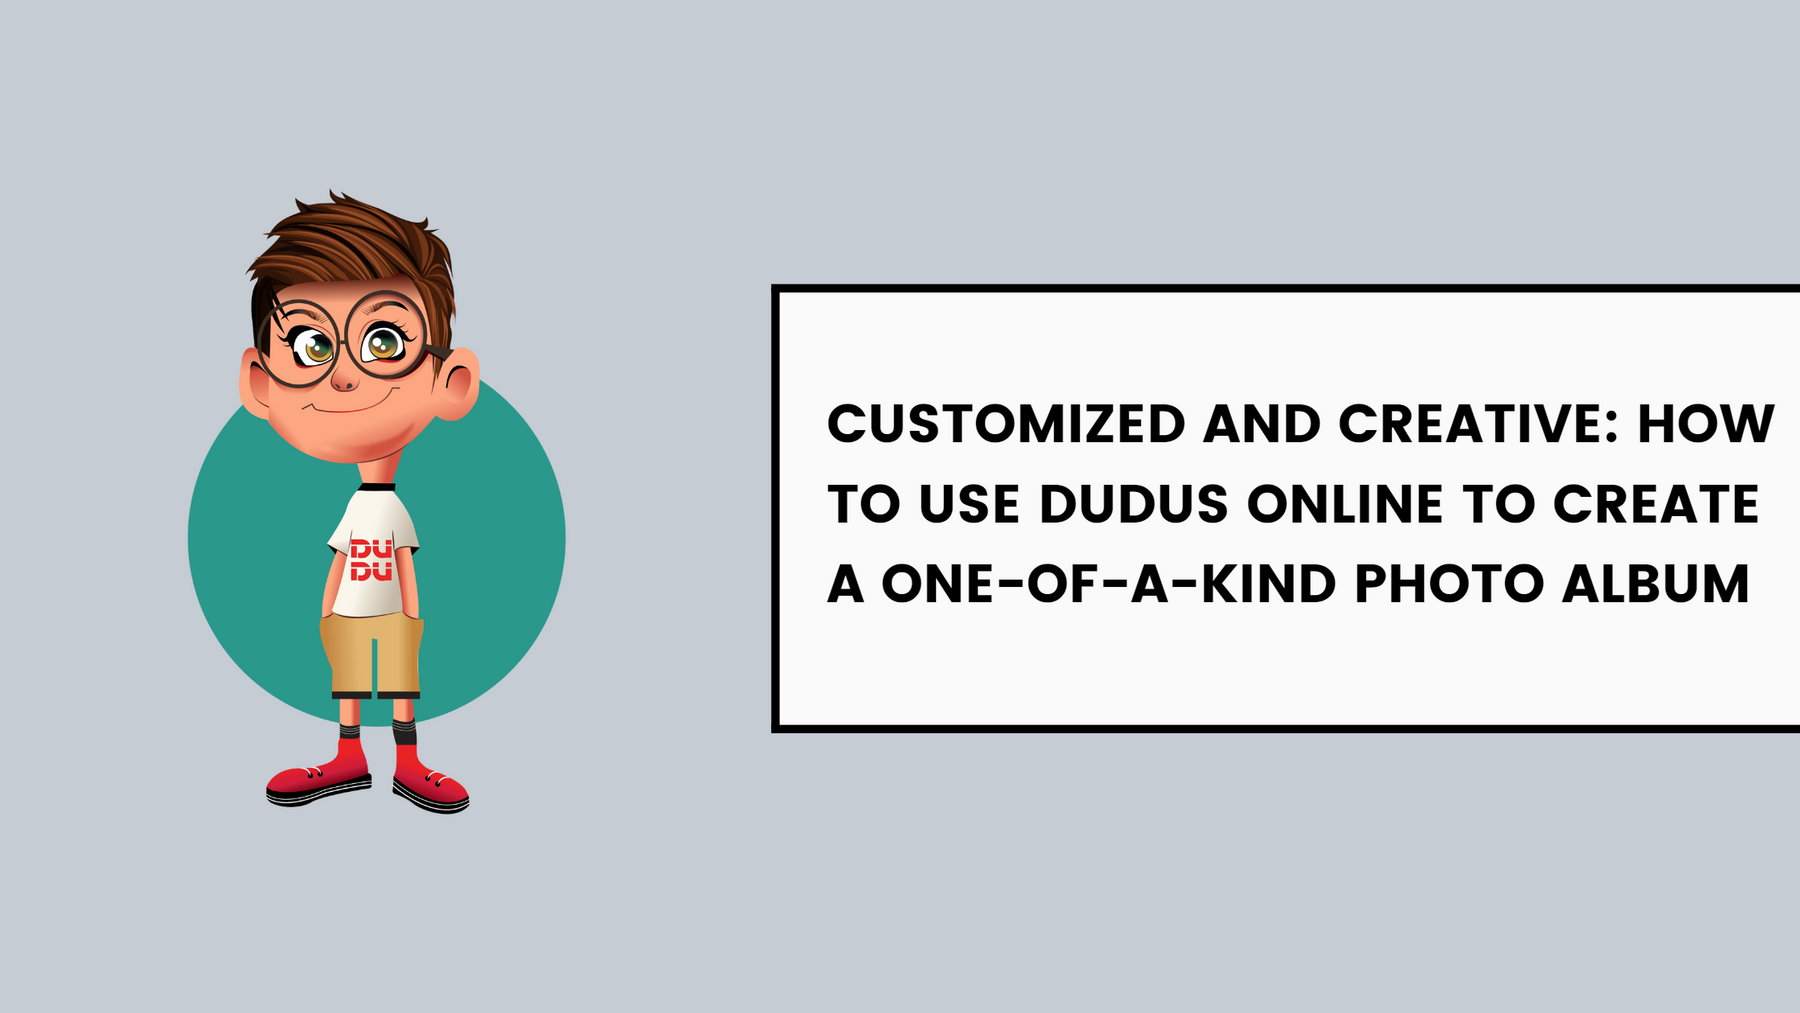 Customized and Creative: How to Use Dudus Online to Create a One-of-a-Kind Photo Album